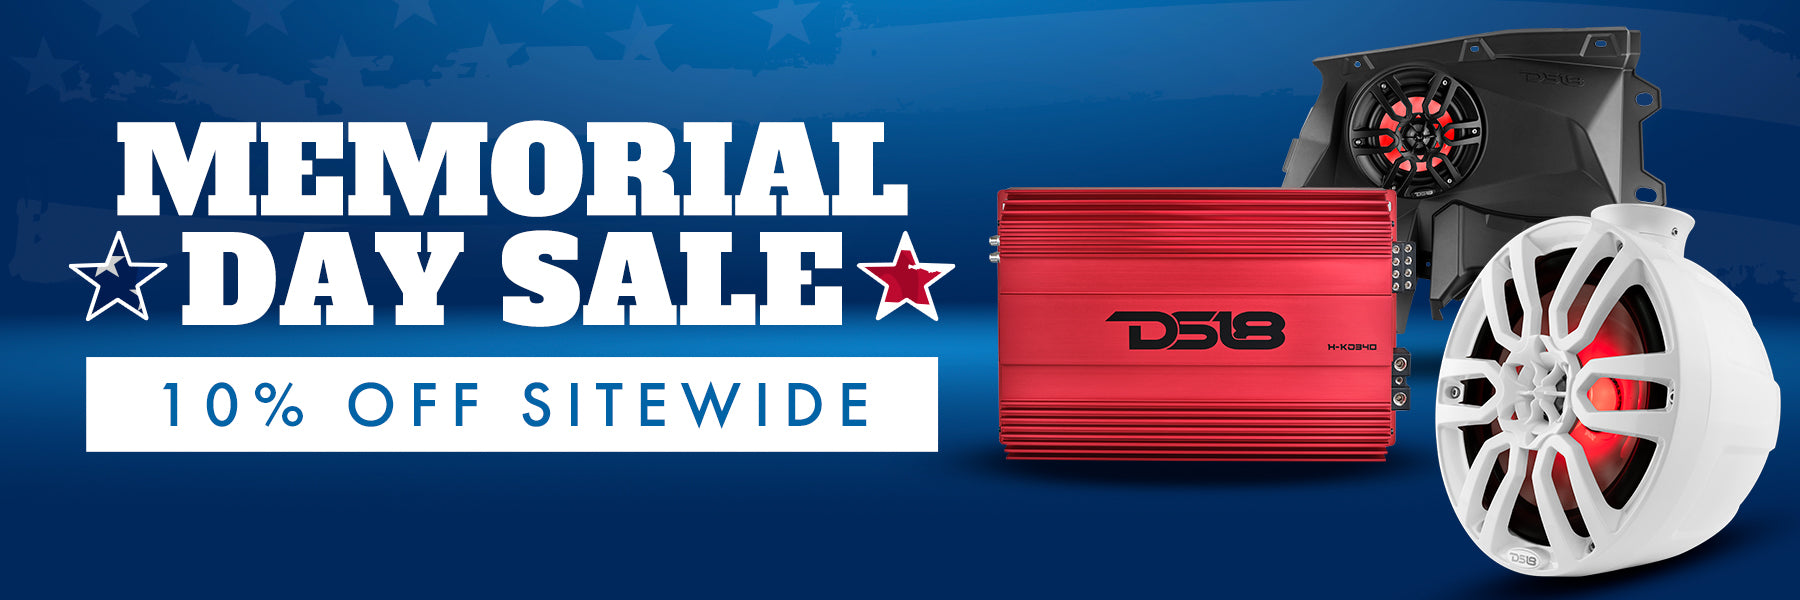 Save Big at DS18's Memorial Day Sale!